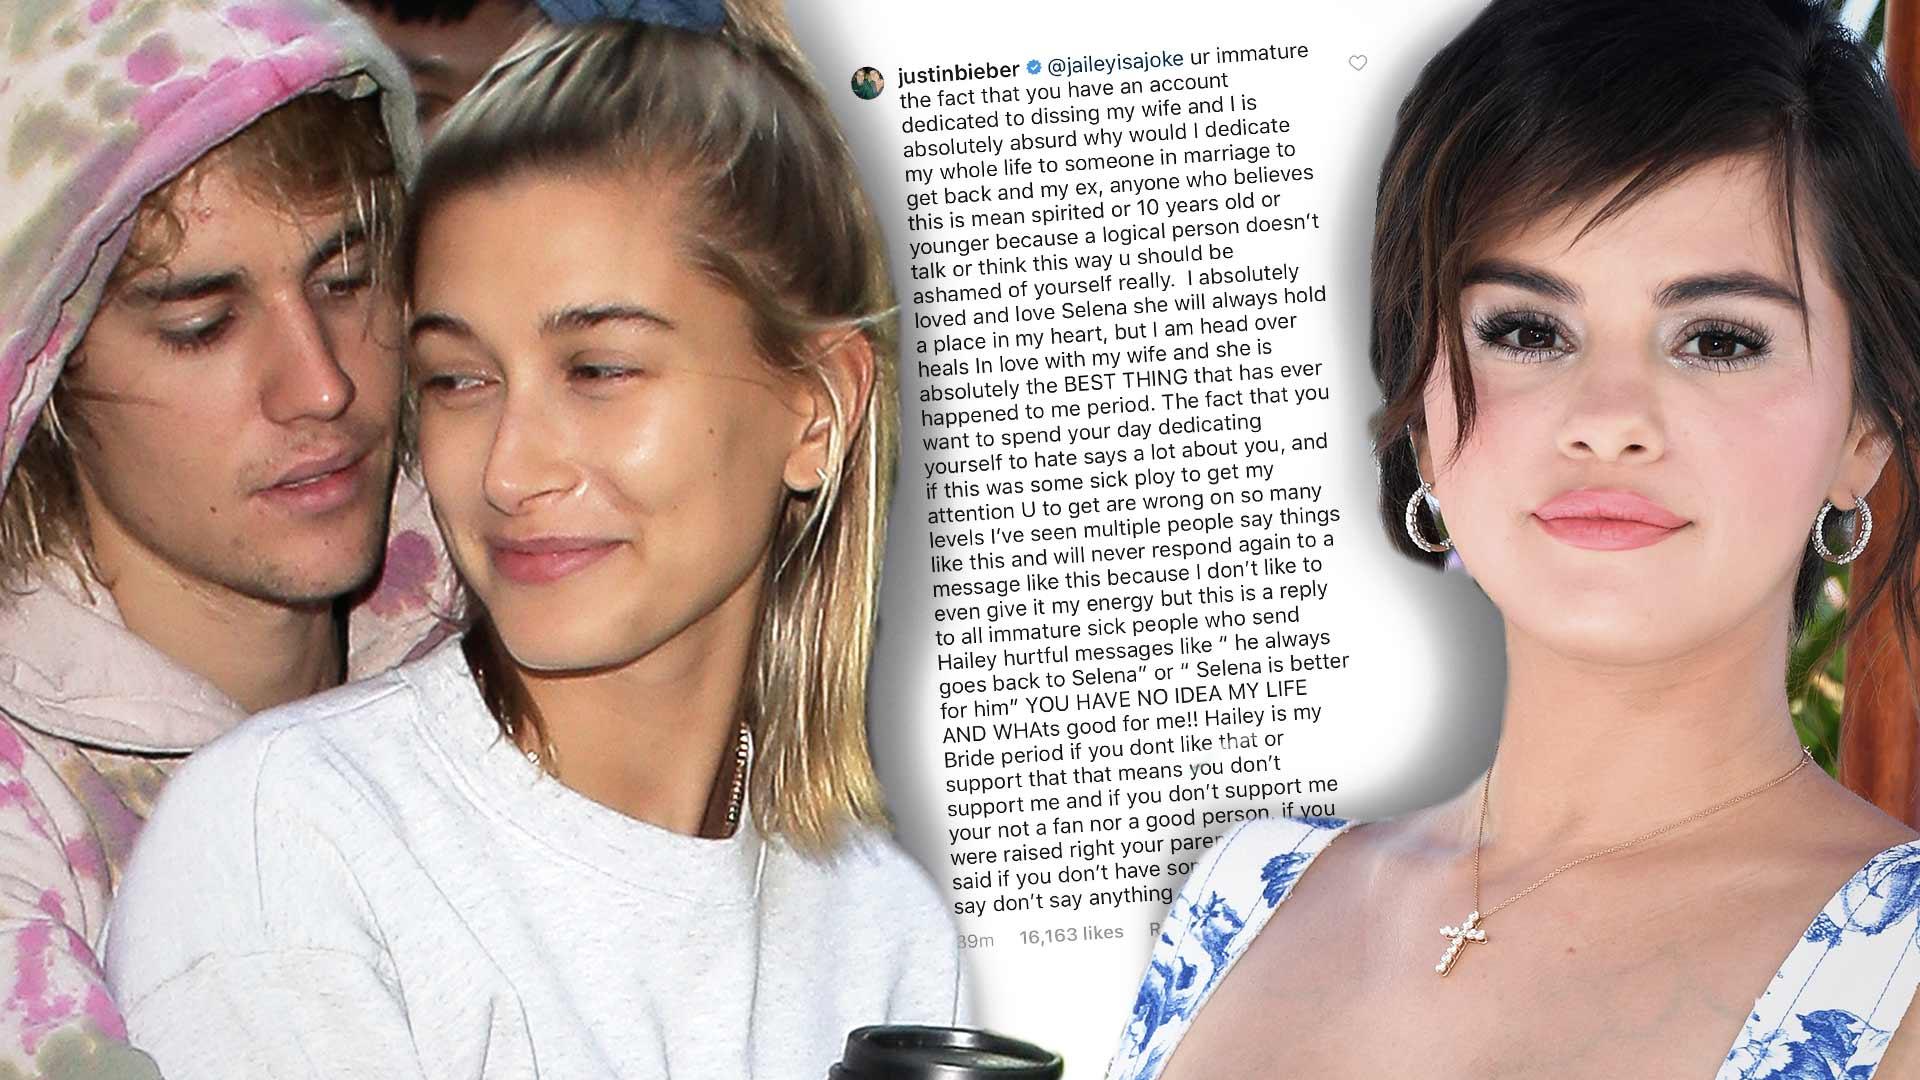 Justin Bieber Slams Fan Who Claims He Only Married Hailey Baldwin to Get Back at Selena Gomez